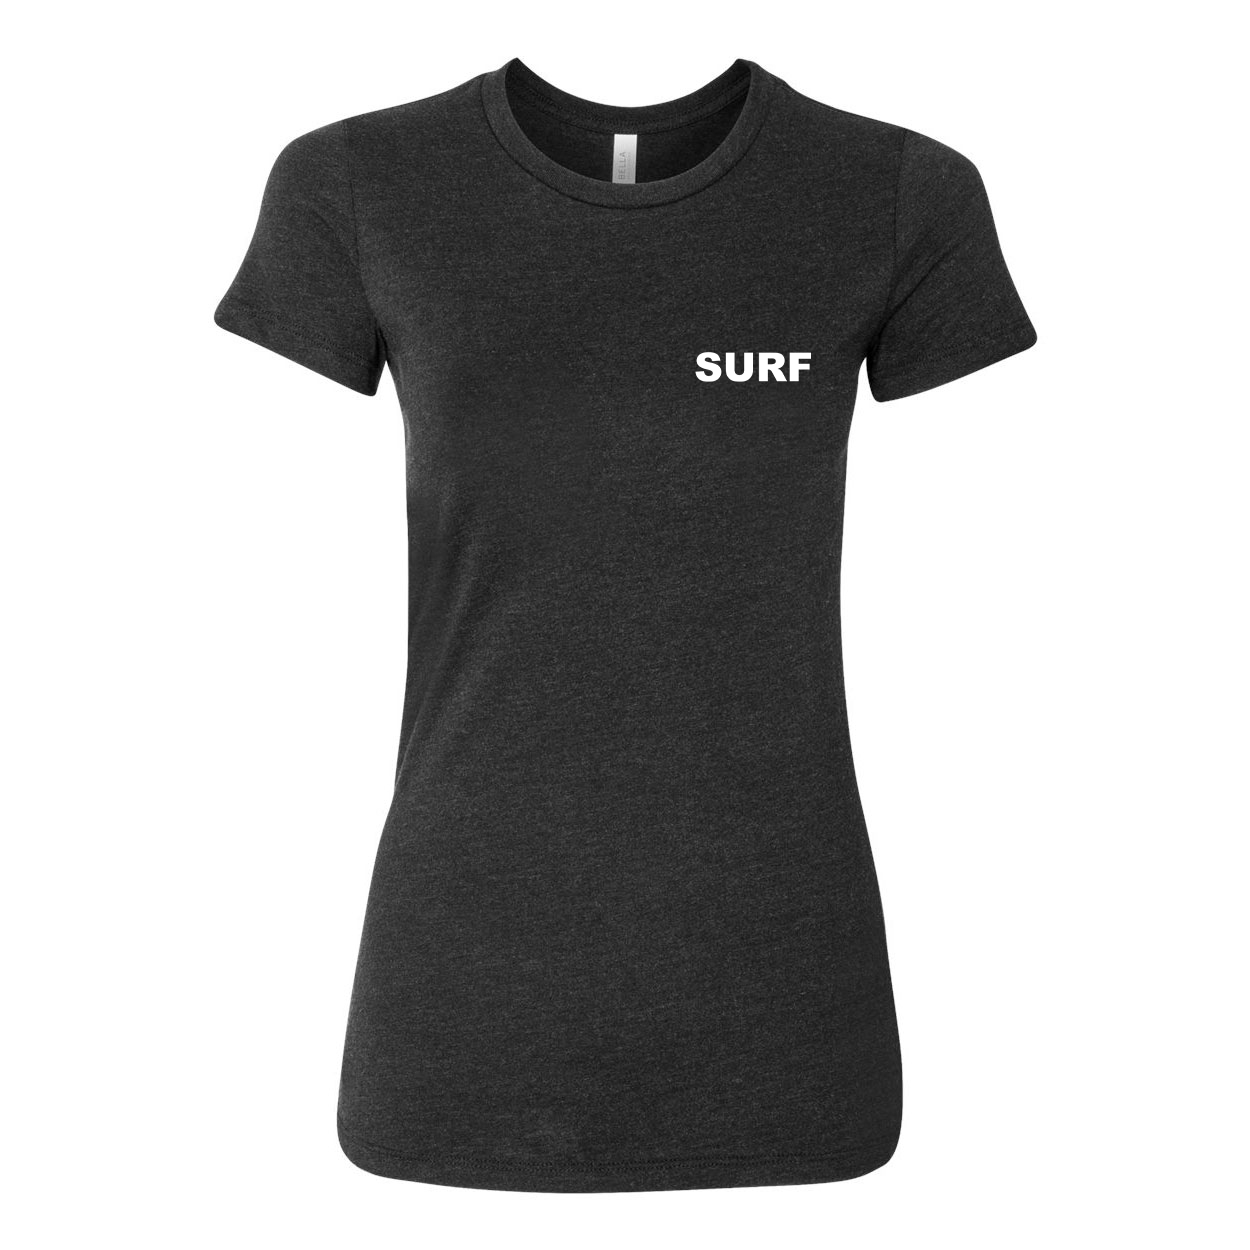 Surf Brand Logo Night Out Womens Fitted T-Shirt Dark Heather Gray